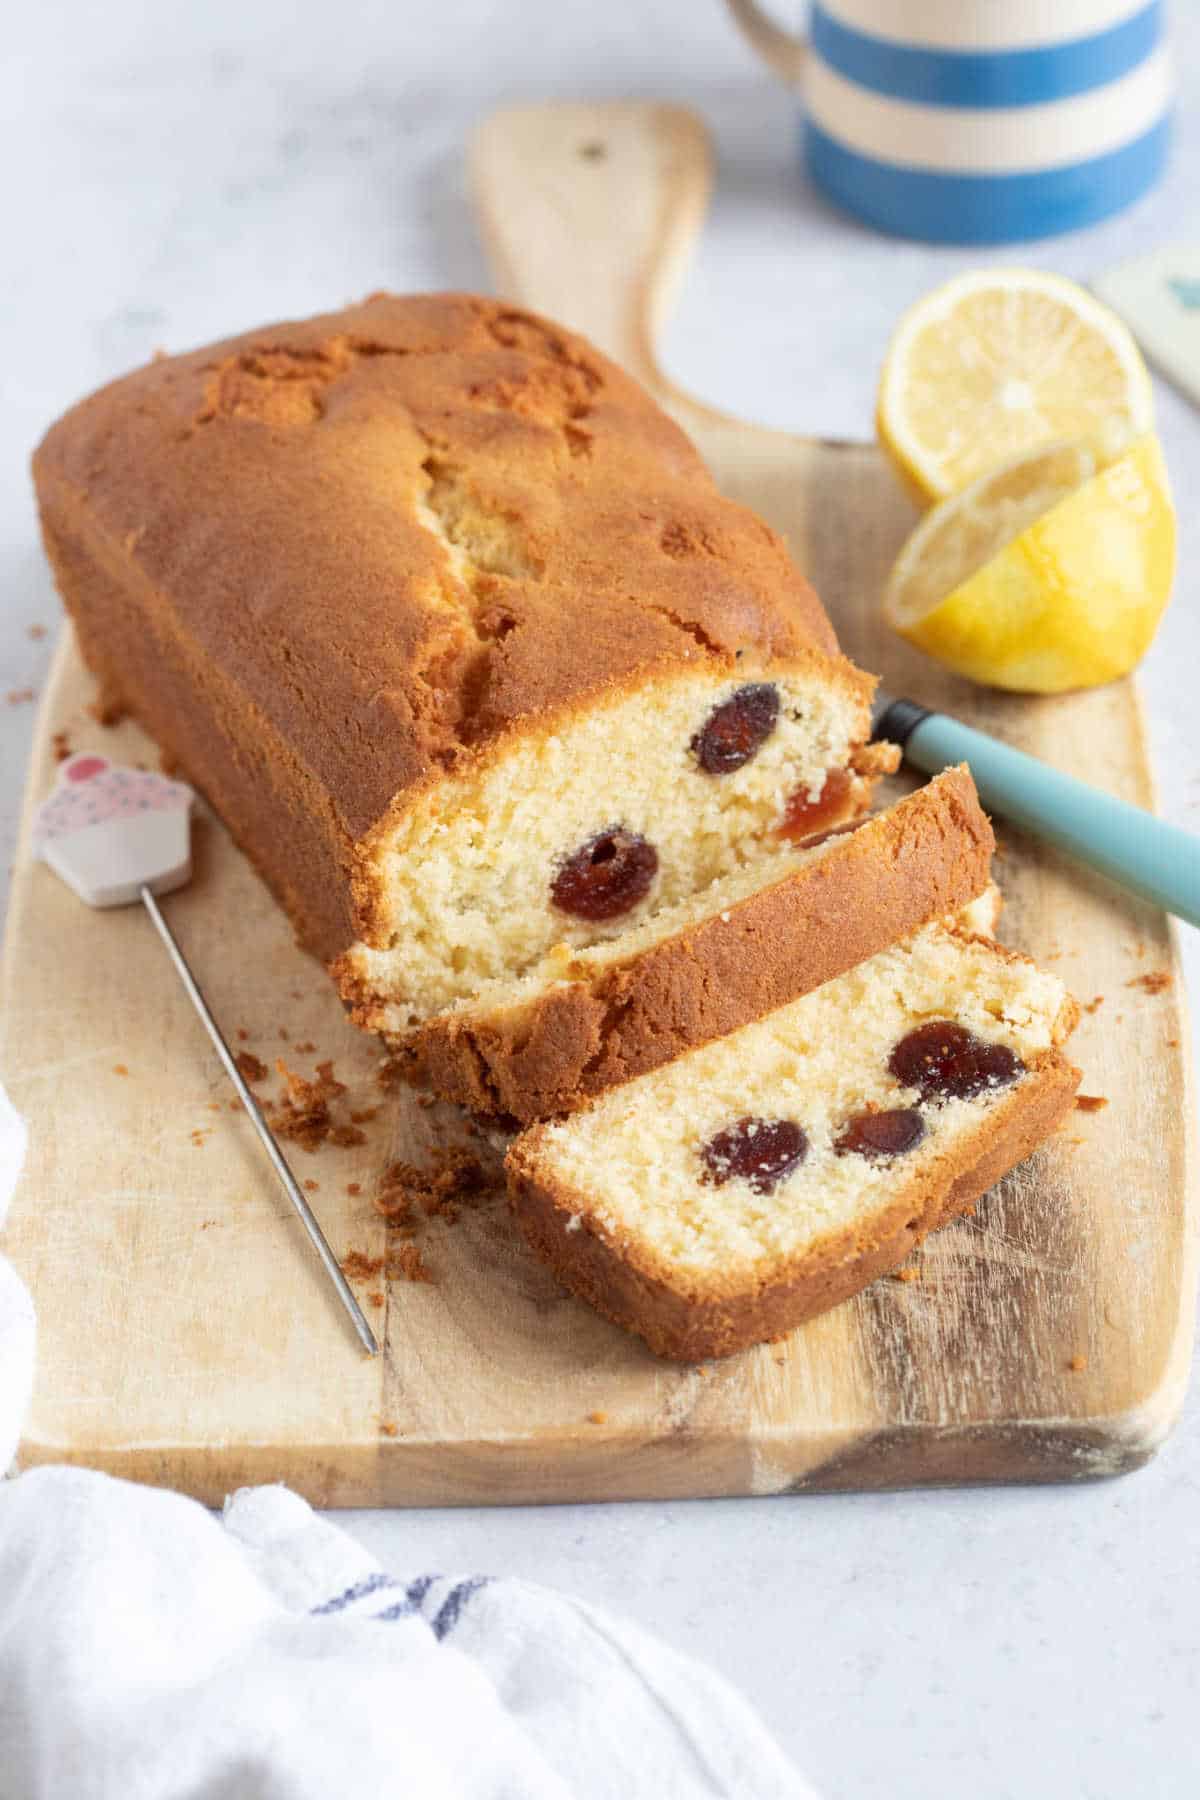 Air fryer cherry Madeira cake on a wooden board with two slices cut.